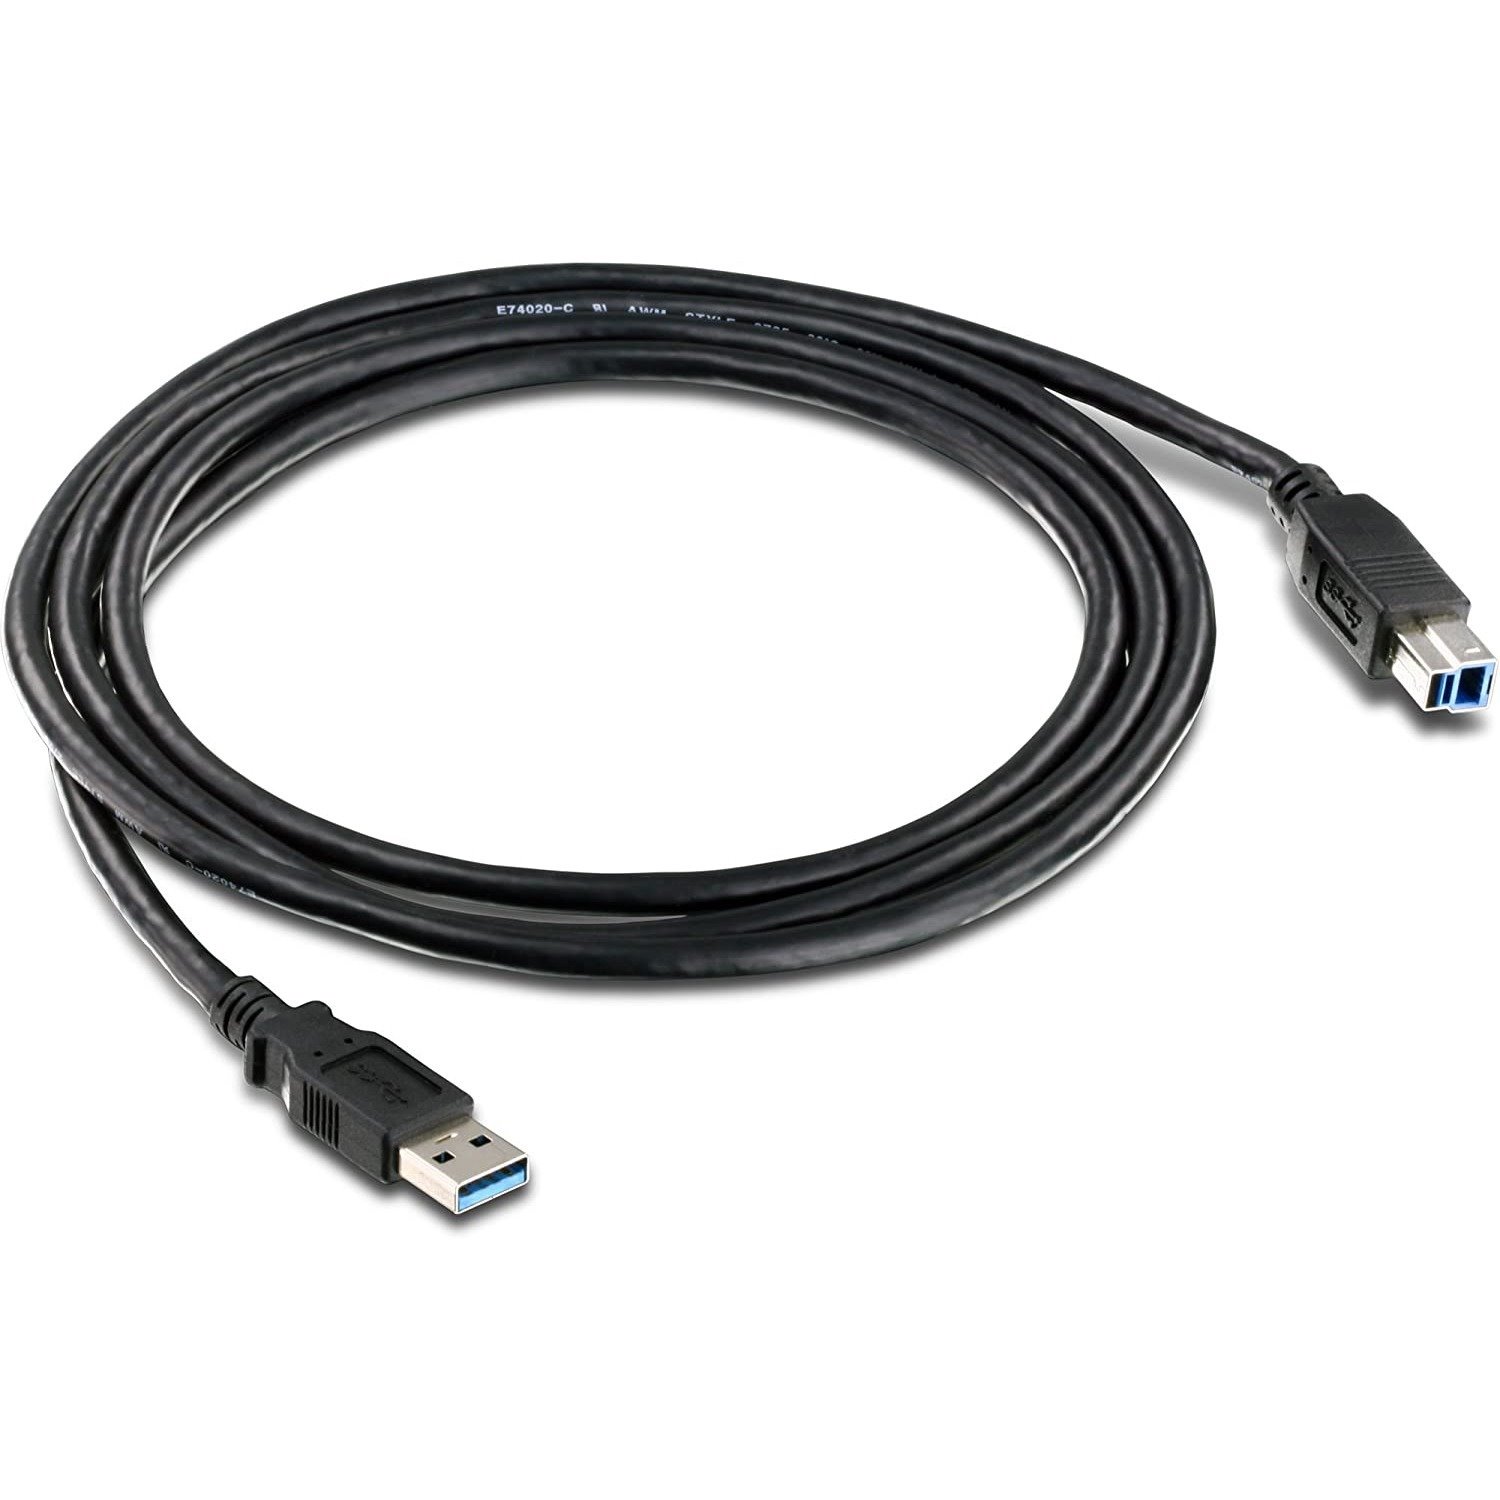 TRENDnet SuperSpeed USB 3.0 Type-A to Type-B Extension Cable, TU3-C10, 3.1 M (10 Ft), 5Gbps Transfer Rates, Full-duplex Data Transmission Support, Backwards Compatible w/ USB 2.0, USB 1.1, USB 1.0